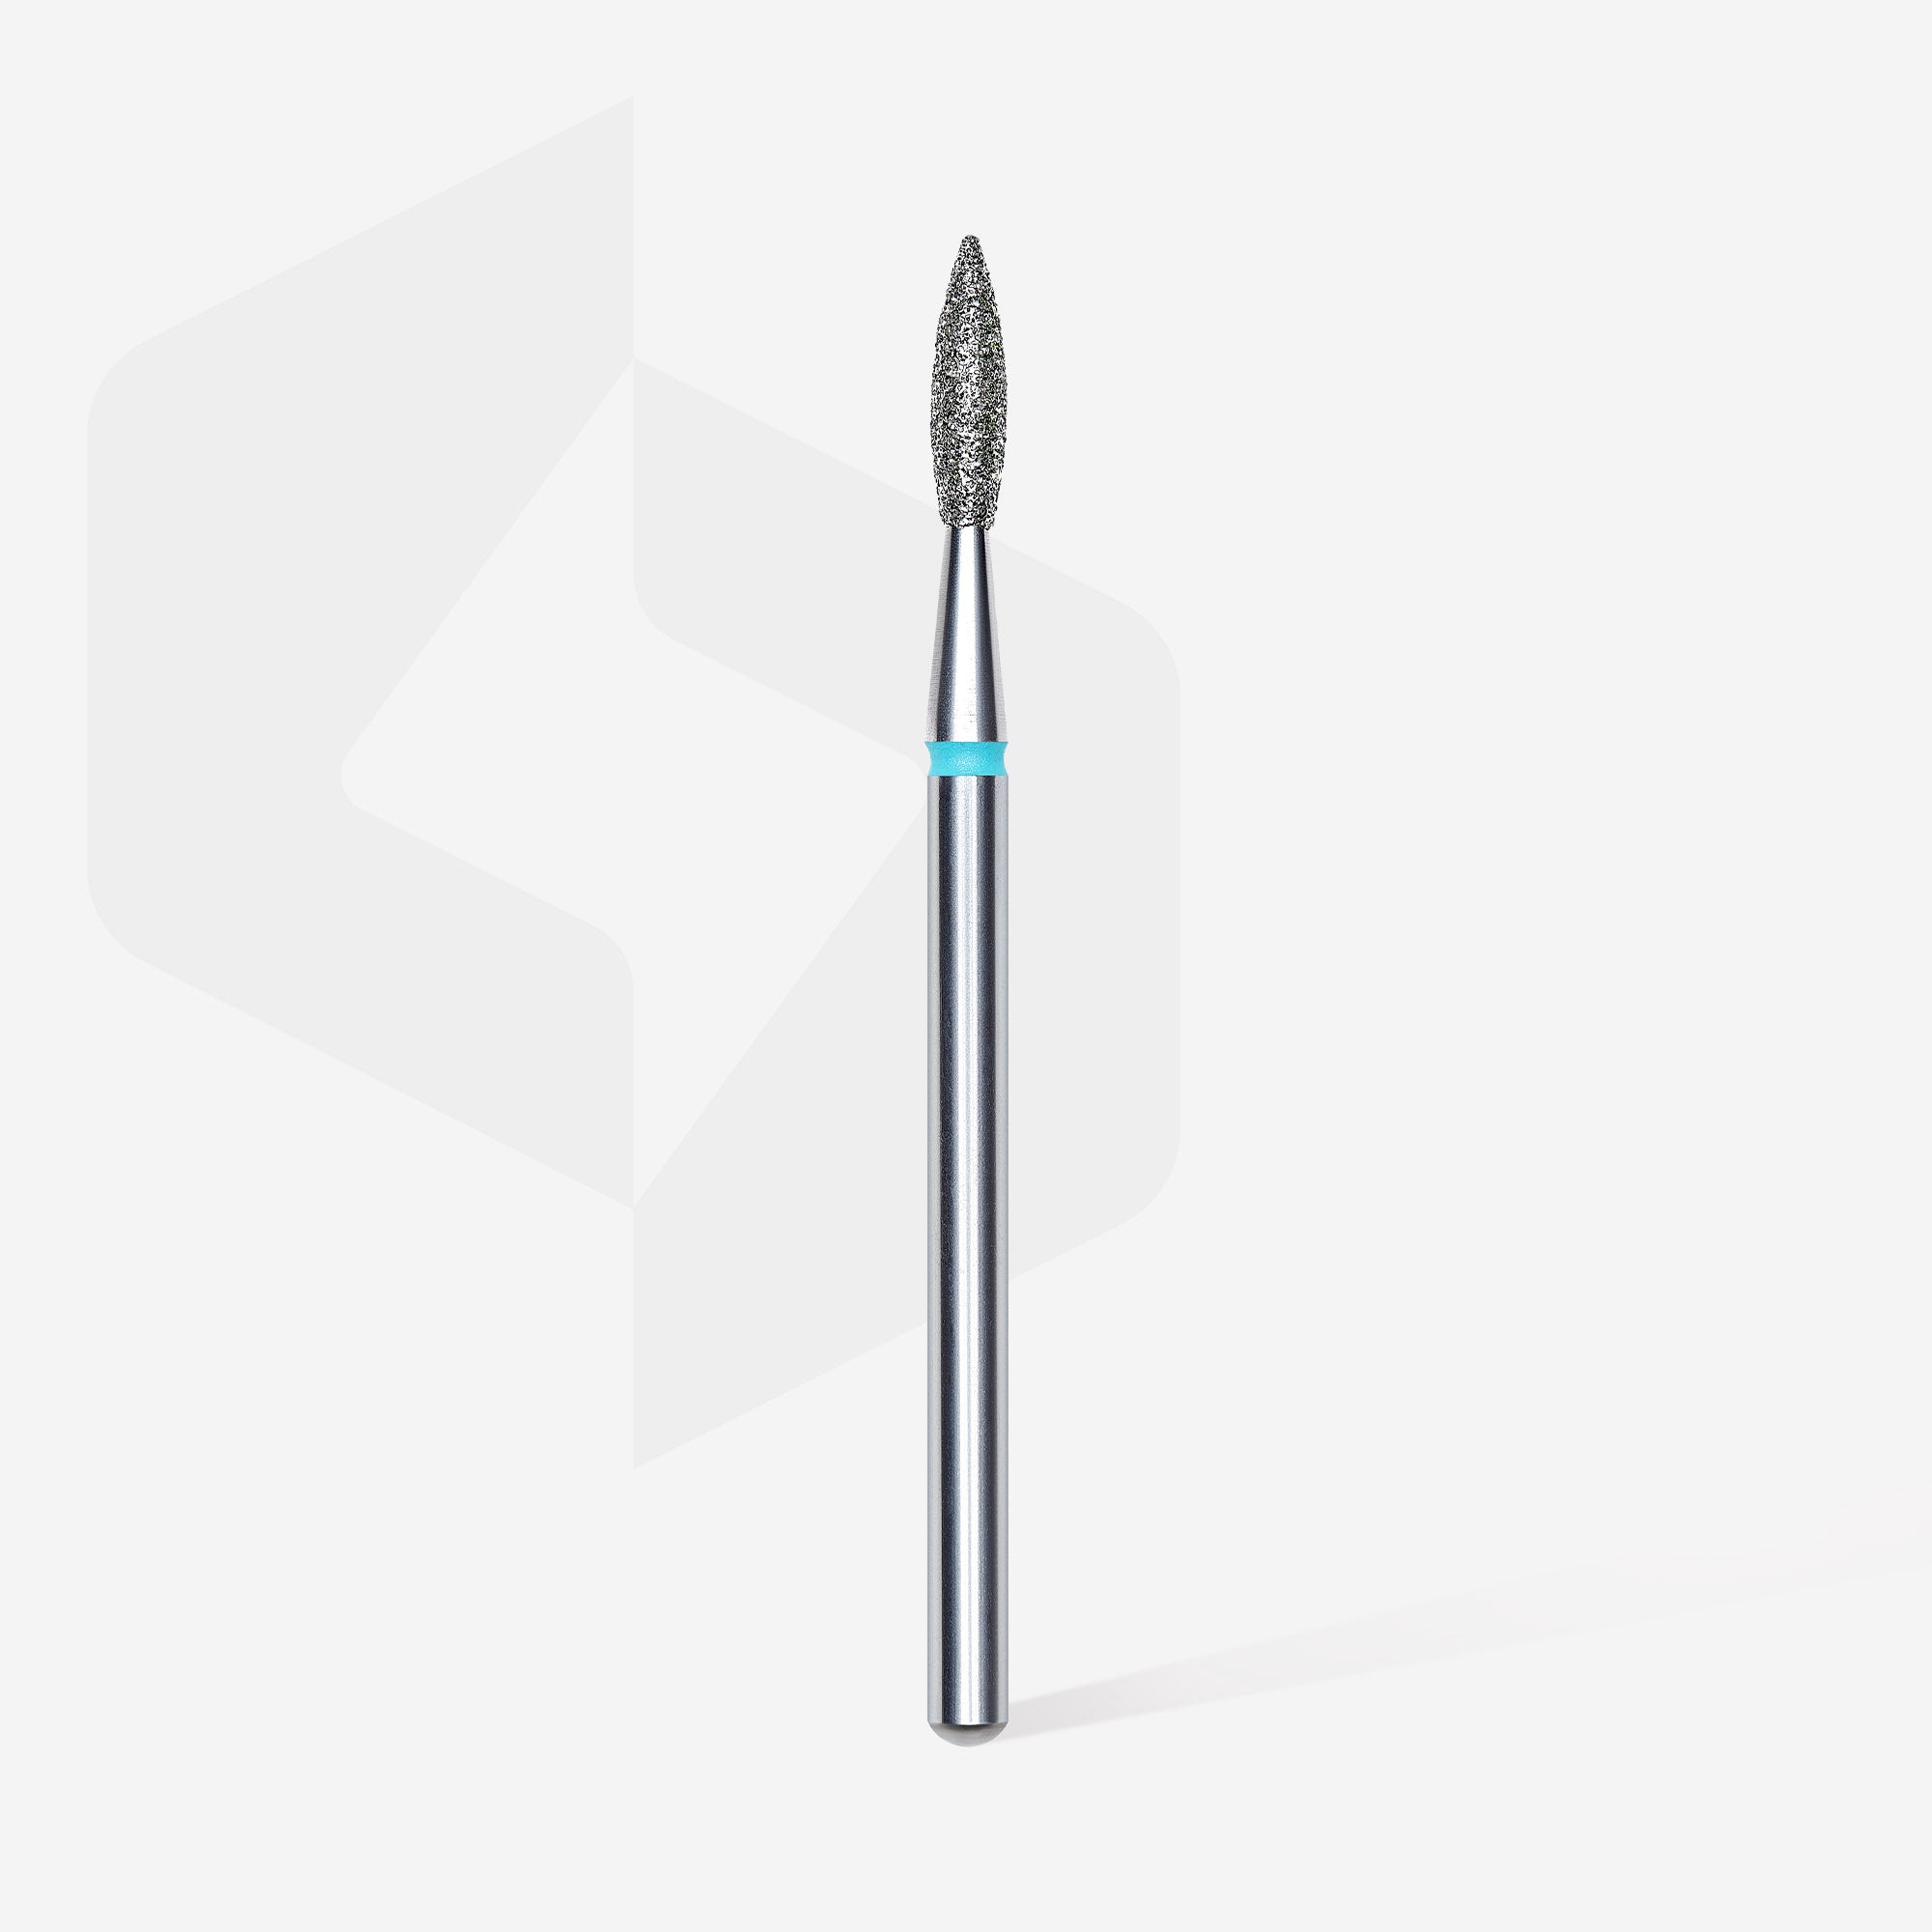 Diamond nail drill bit "Pointed flame" blue